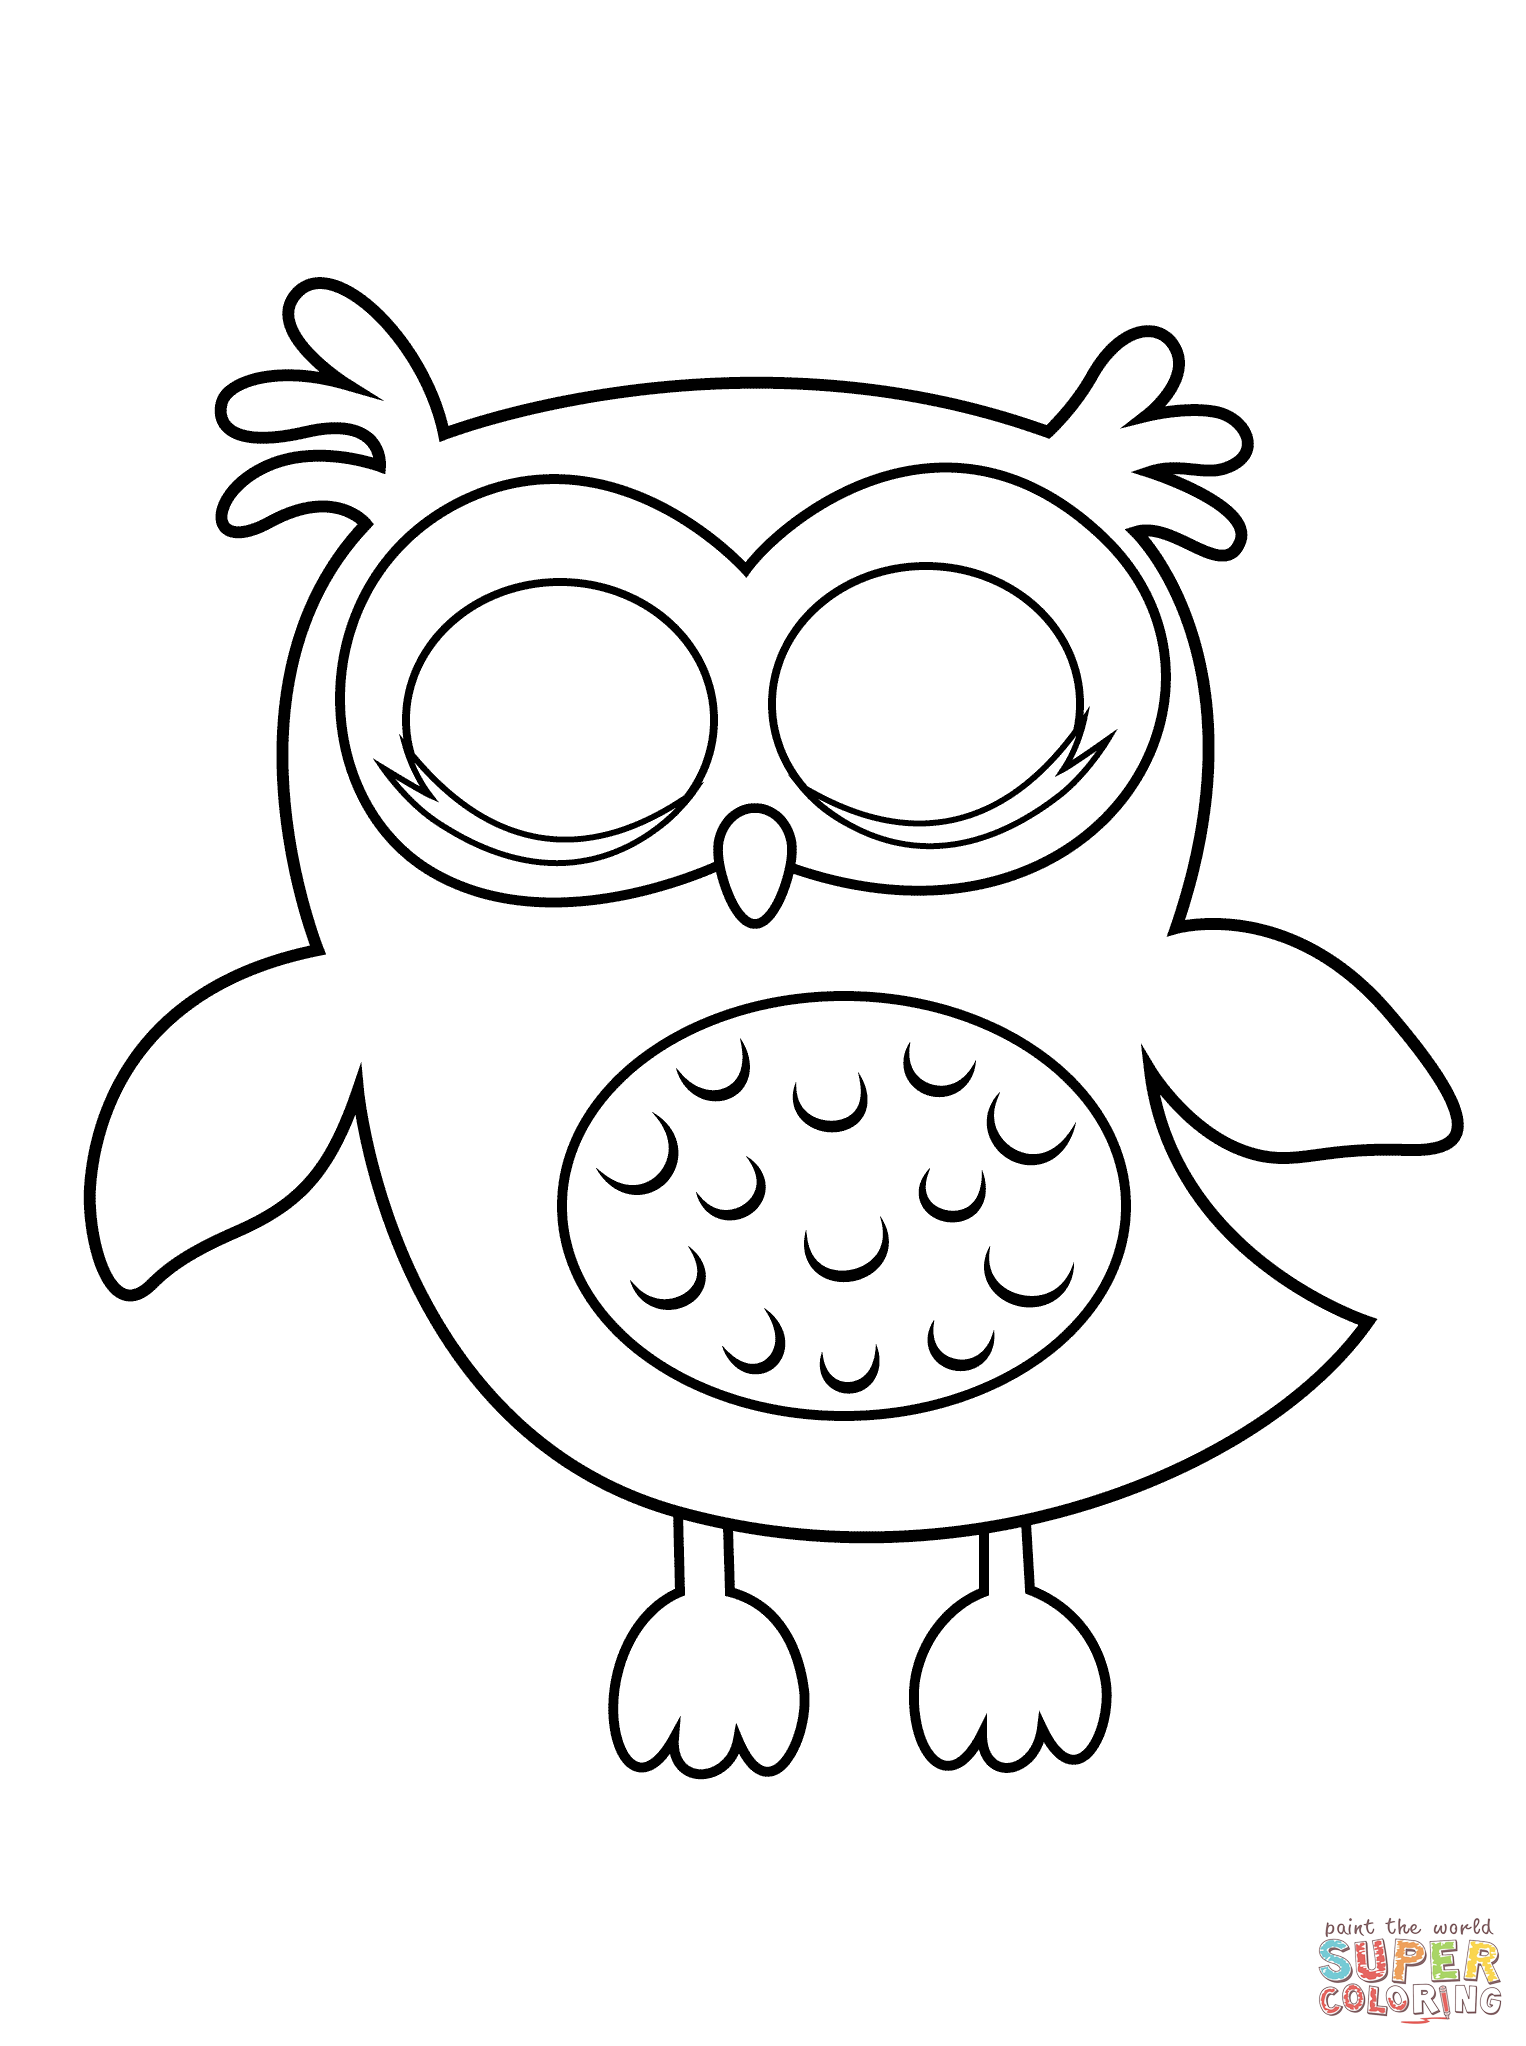 Owls coloring pages | Free Coloring Pages